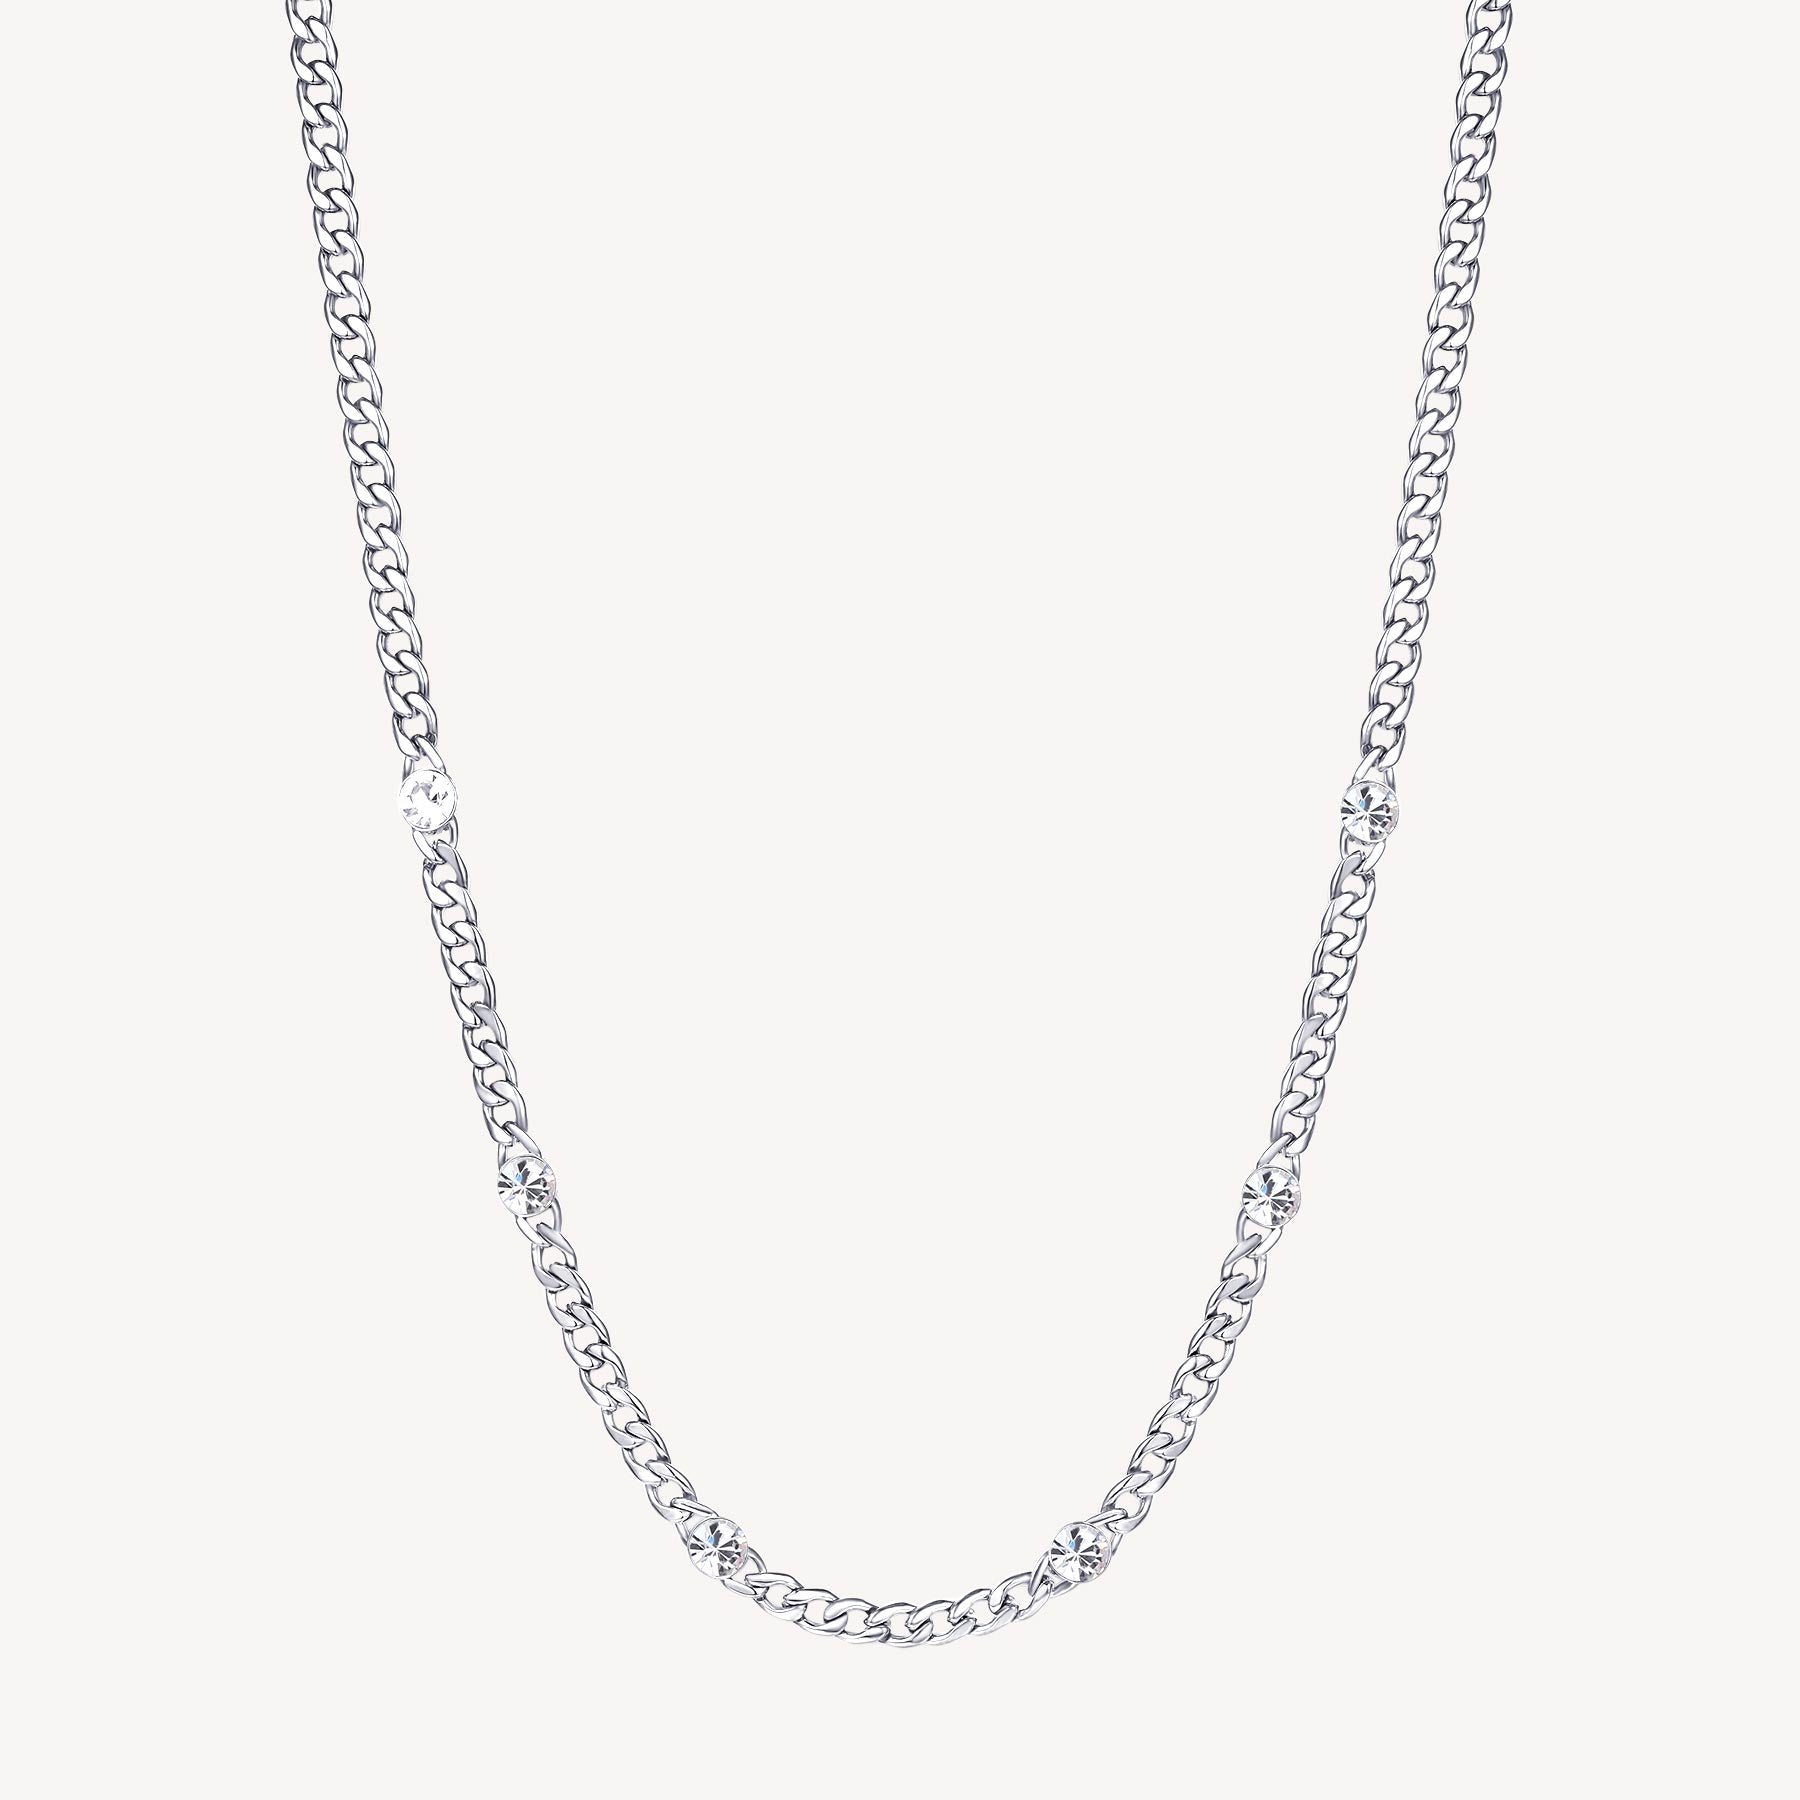 Symphonia Chain Crystal Necklace